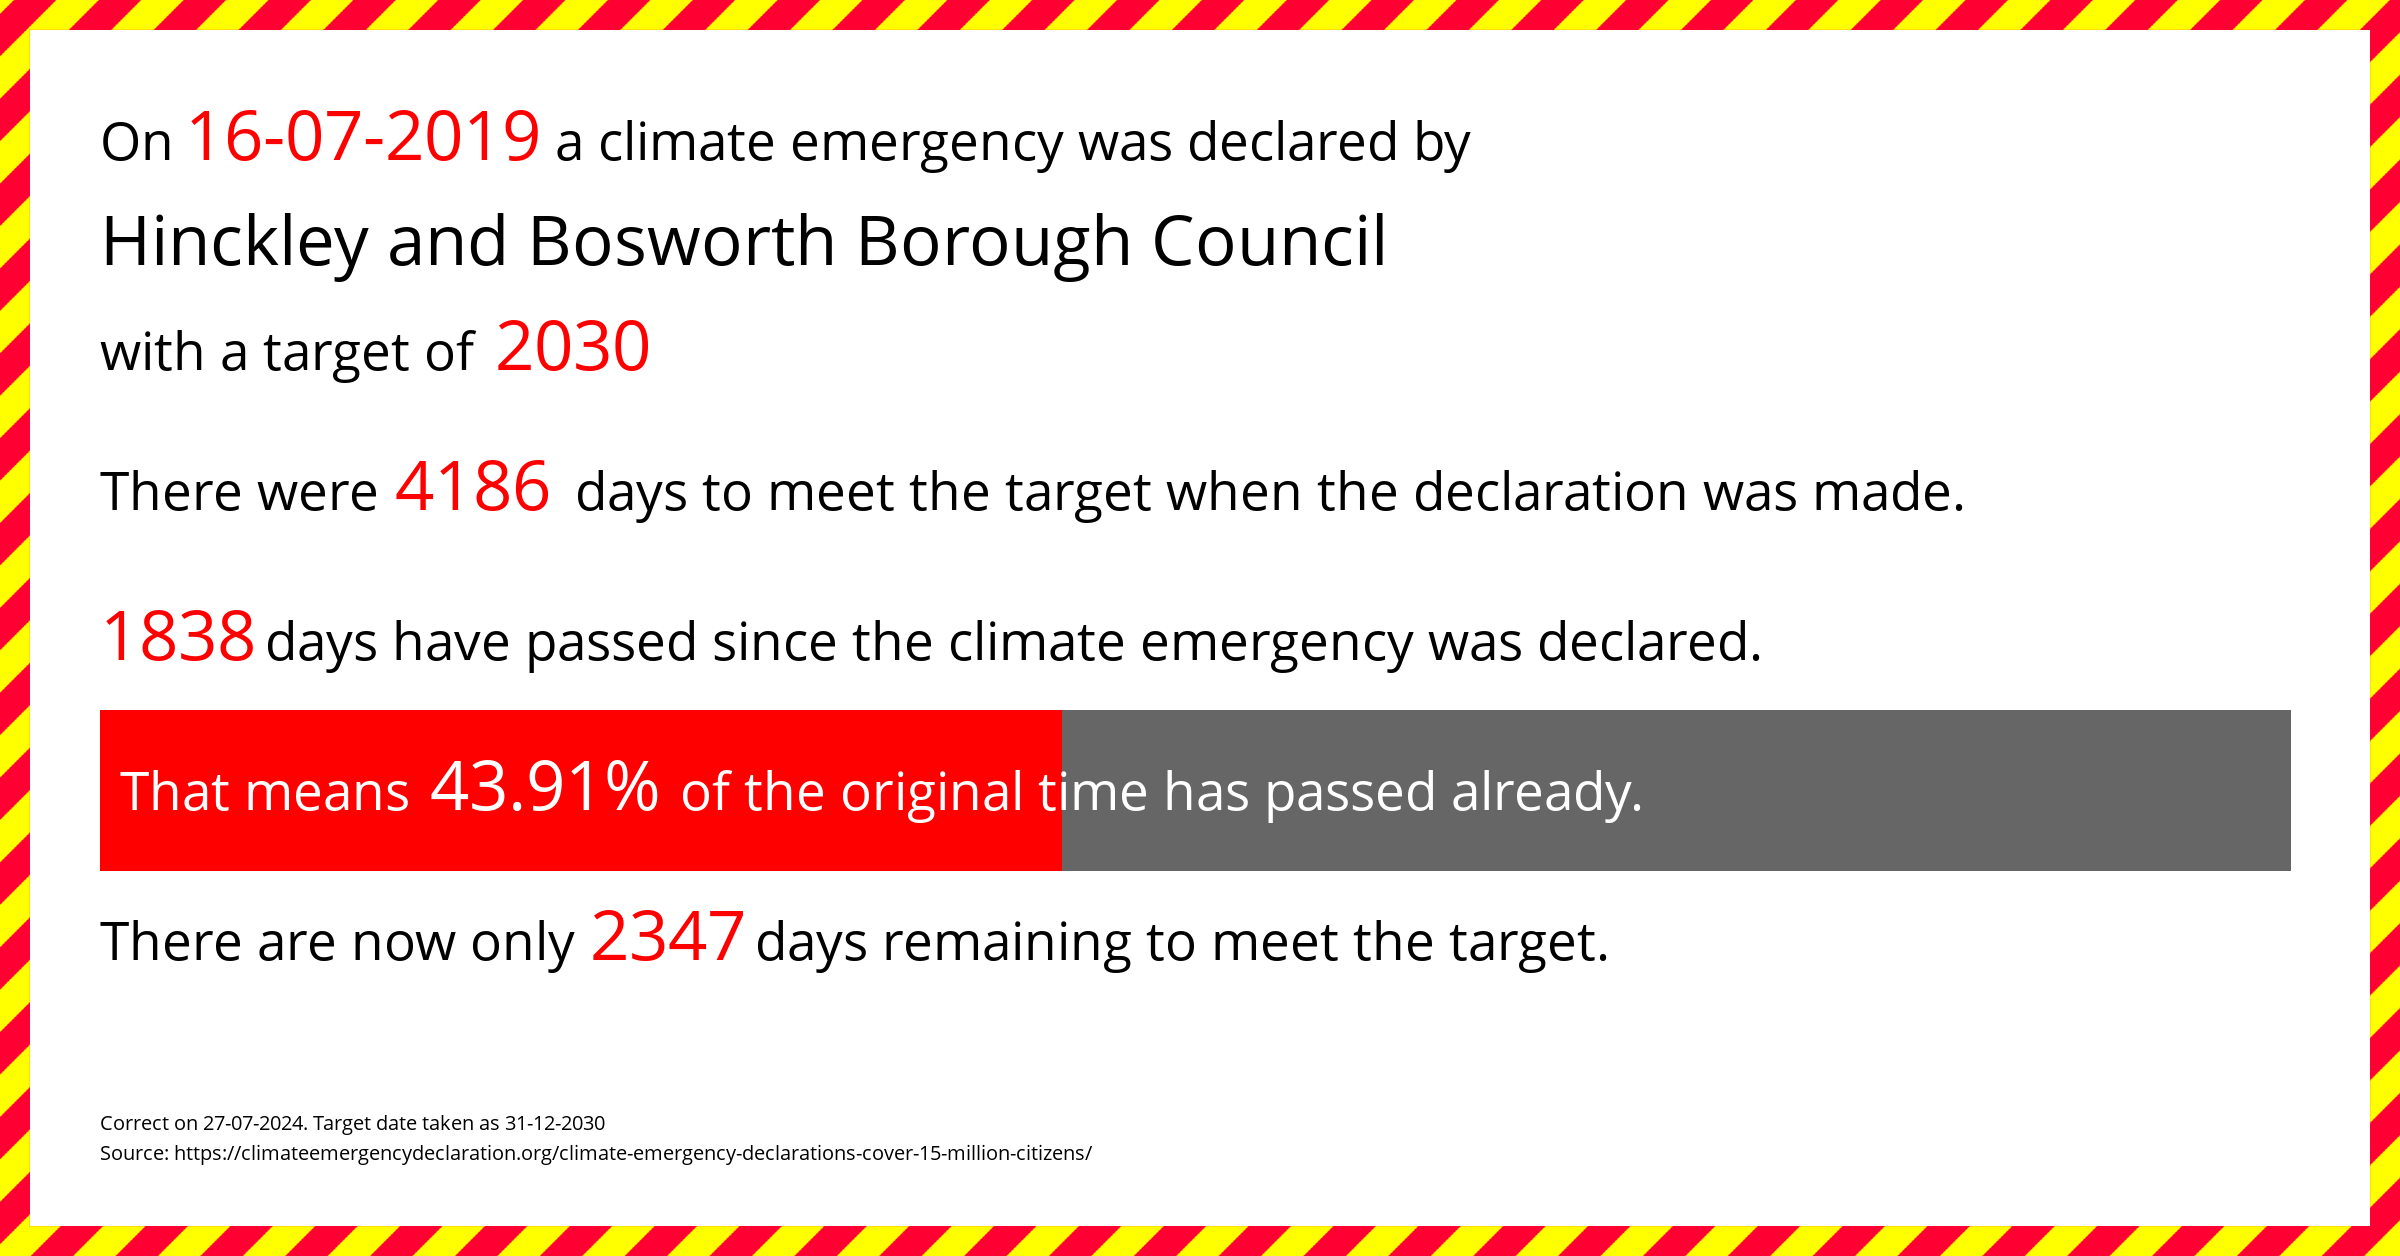 Hinckley and Bosworth Borough Council declared a Climate emergency on Tuesday 16th July 2019, with a target of 2030.